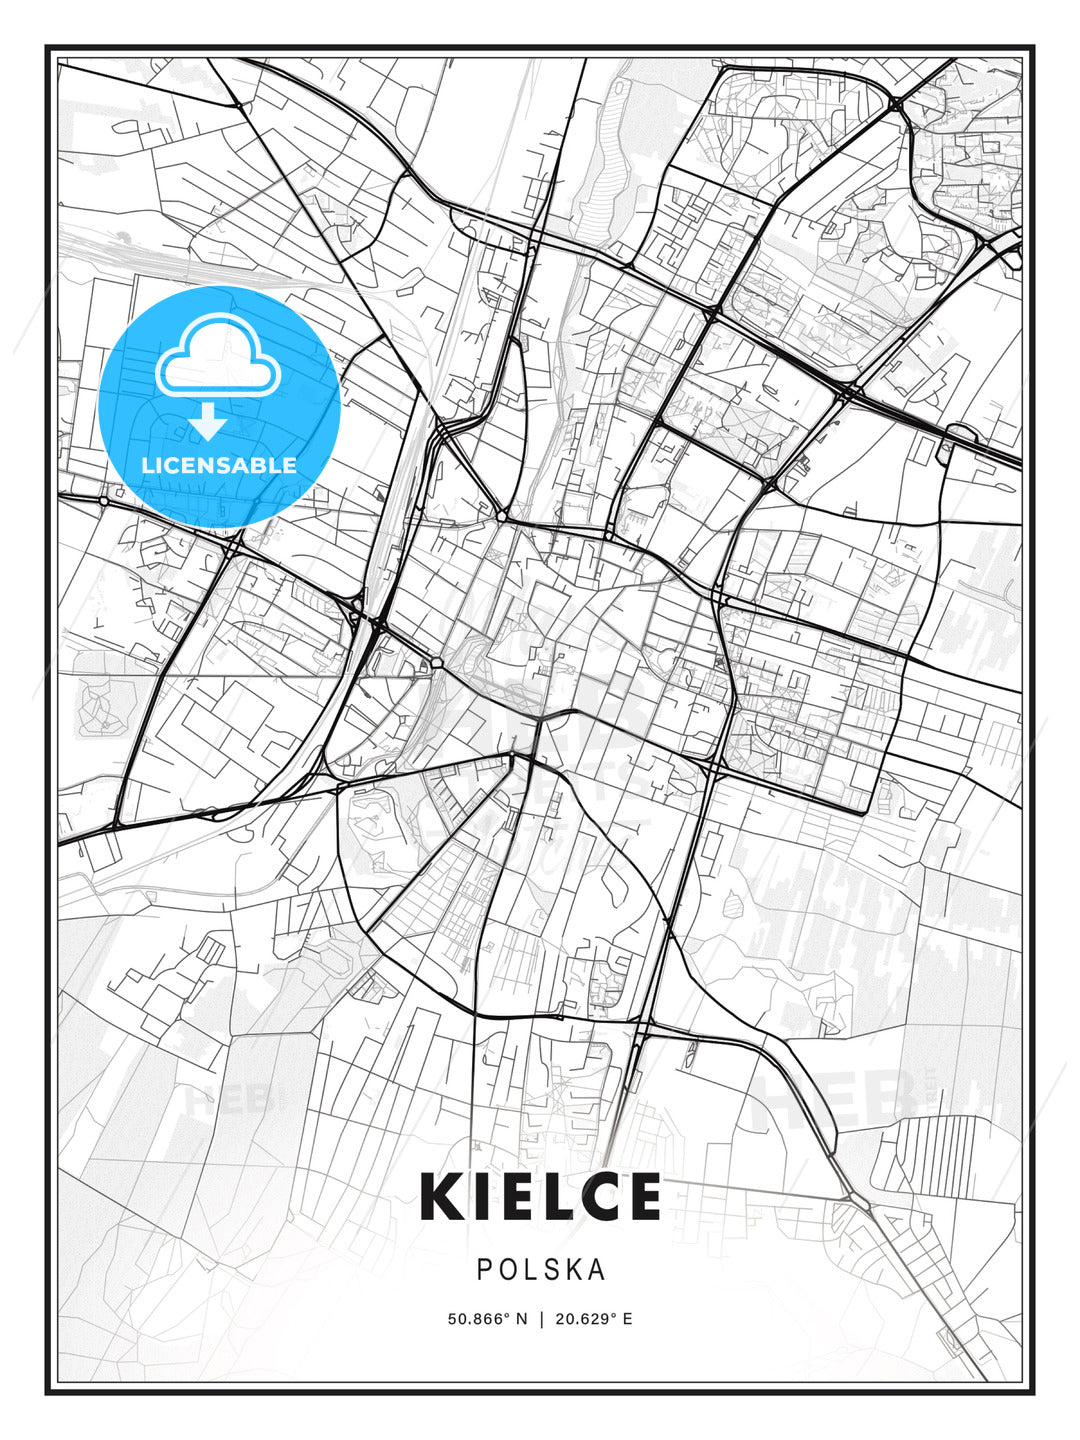 Kielce, Poland, Modern Print Template in Various Formats - HEBSTREITS Sketches